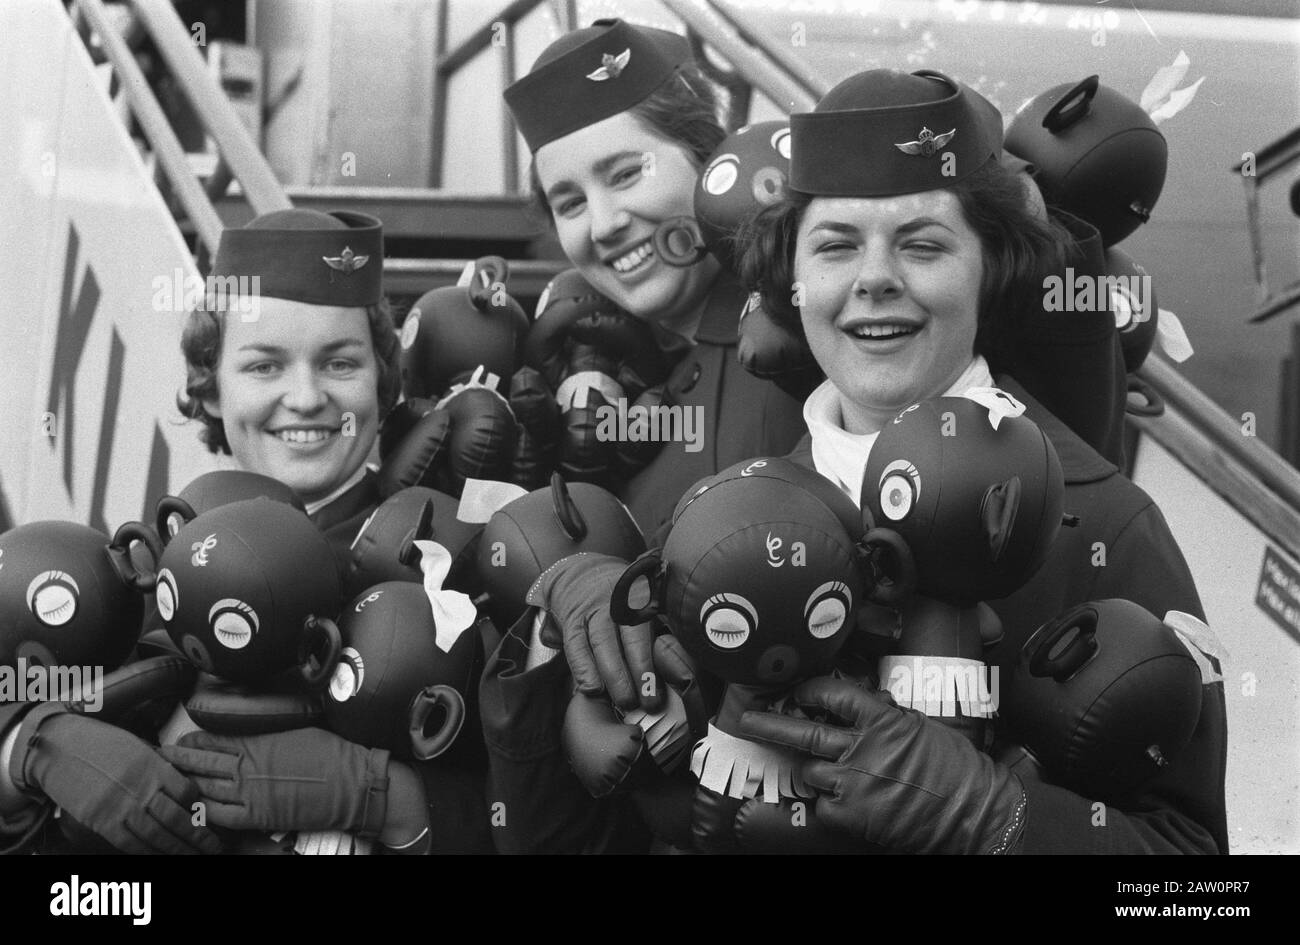 New rage after the hula hoop, winky doll, stewardesses with winky doll Date: November 9, 1960 Keywords: HOSTESSES Stock Photo